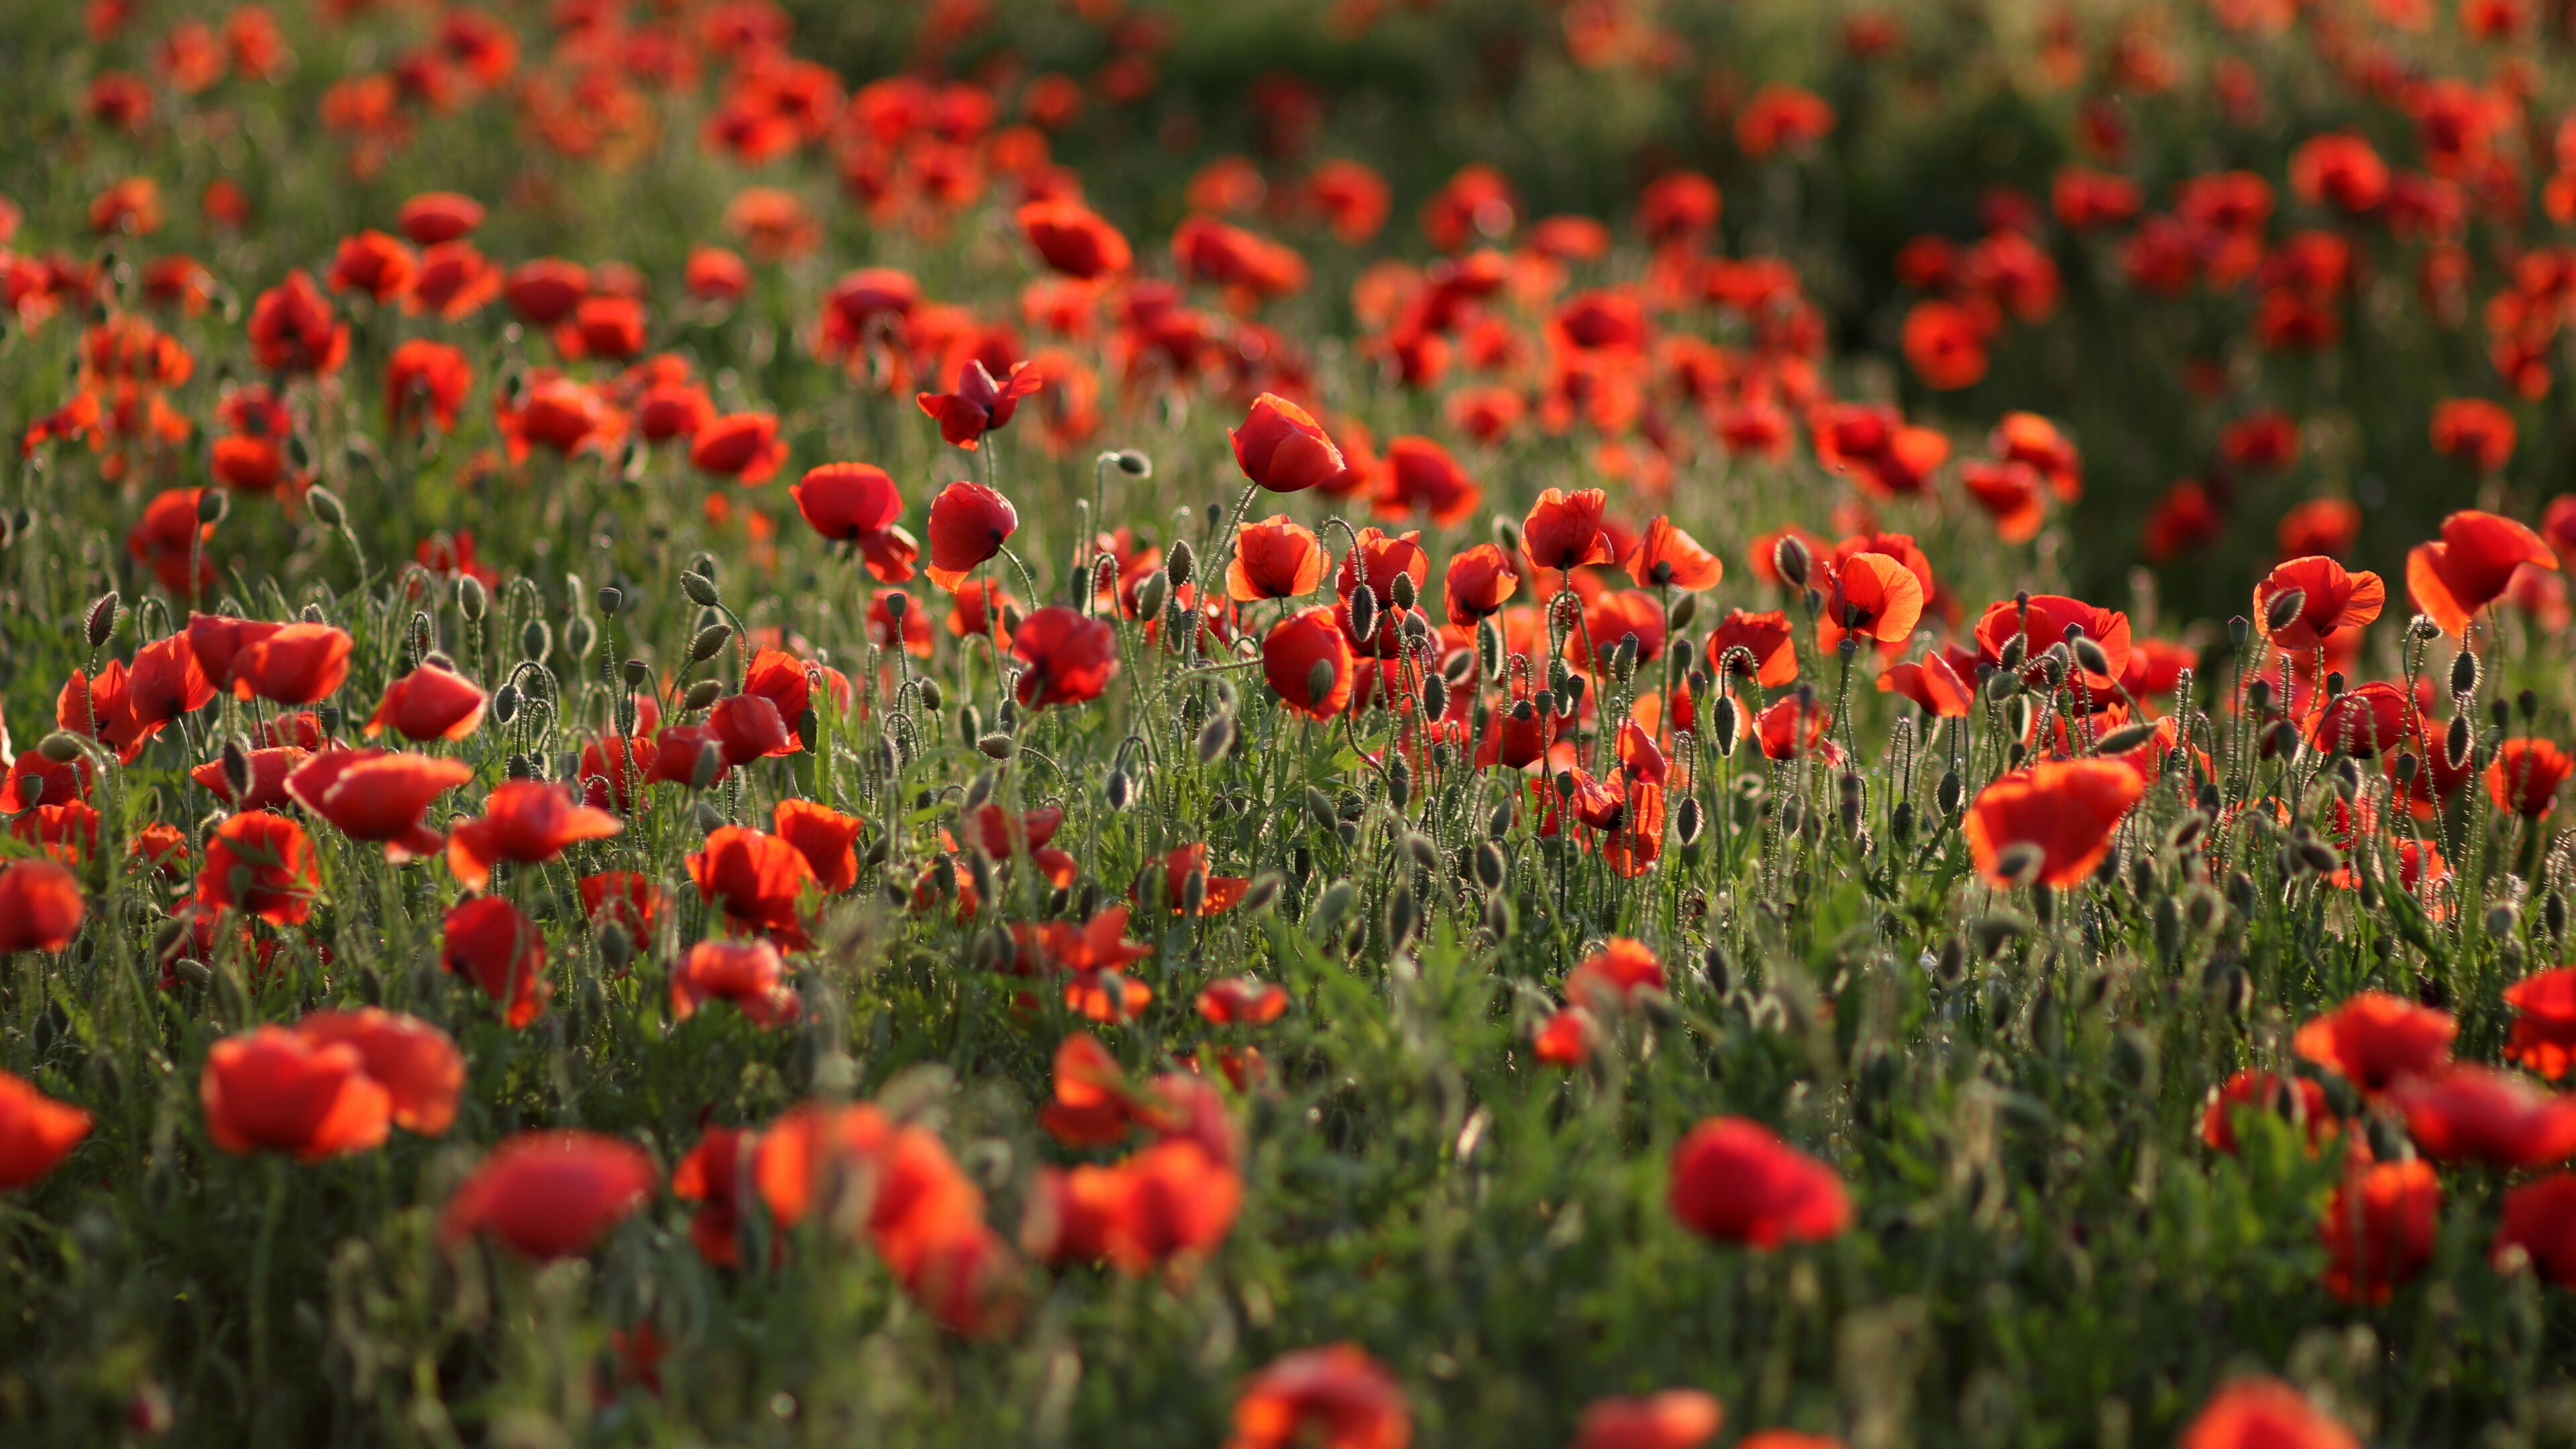 Poppy Flower: Poppies are herbaceous plants, often grown for their colourful flowers. 3840x2160 4K Wallpaper.